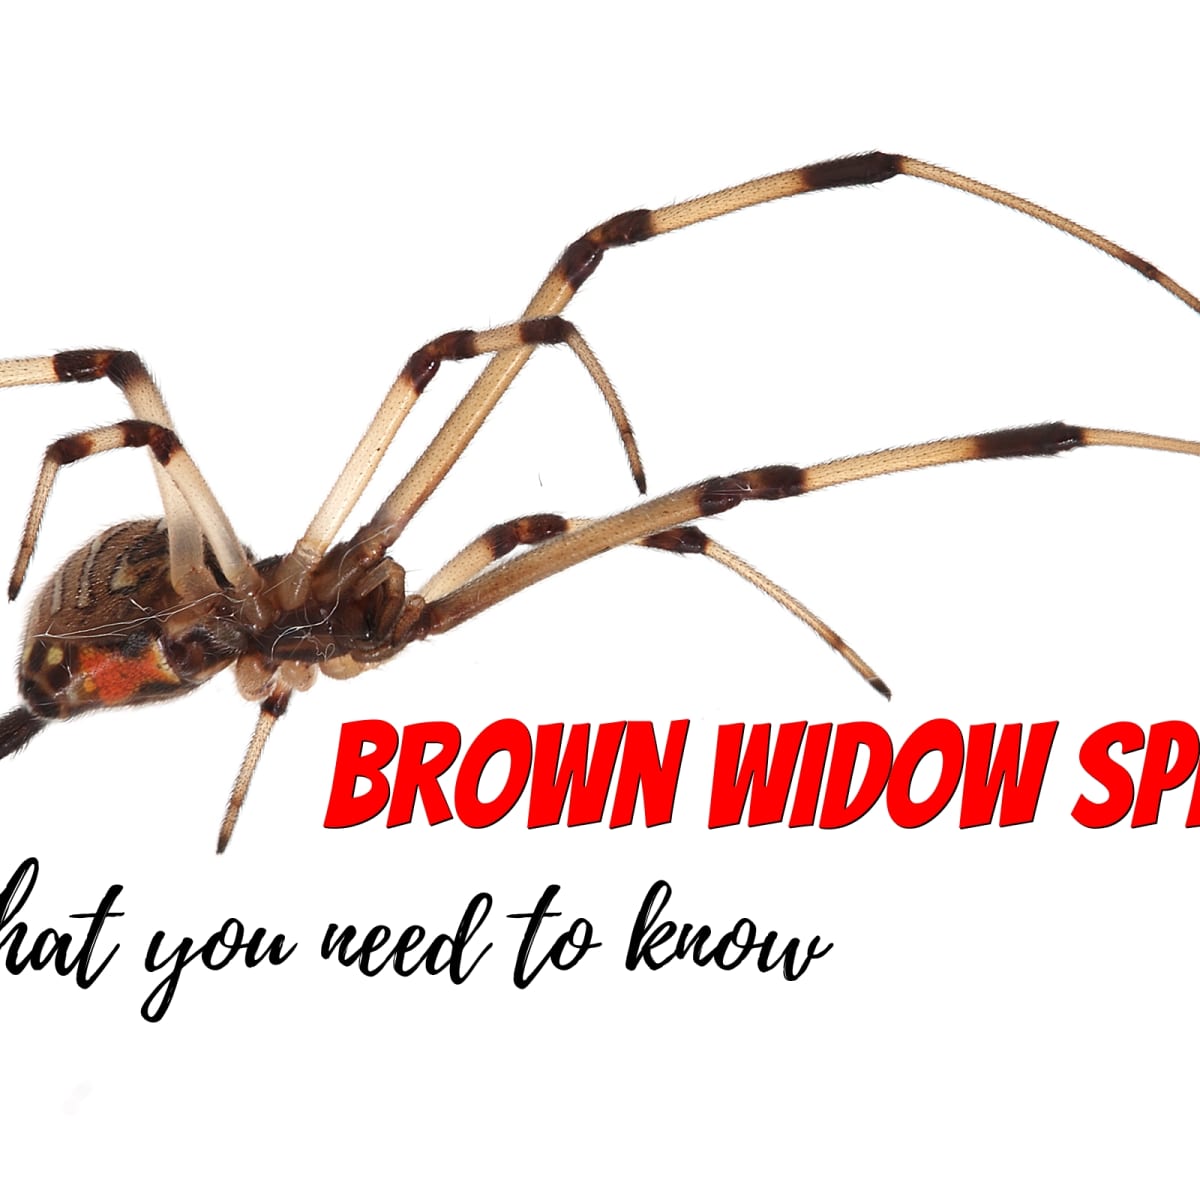 What You Need To Know About The Brown Widow Spider Dengarden